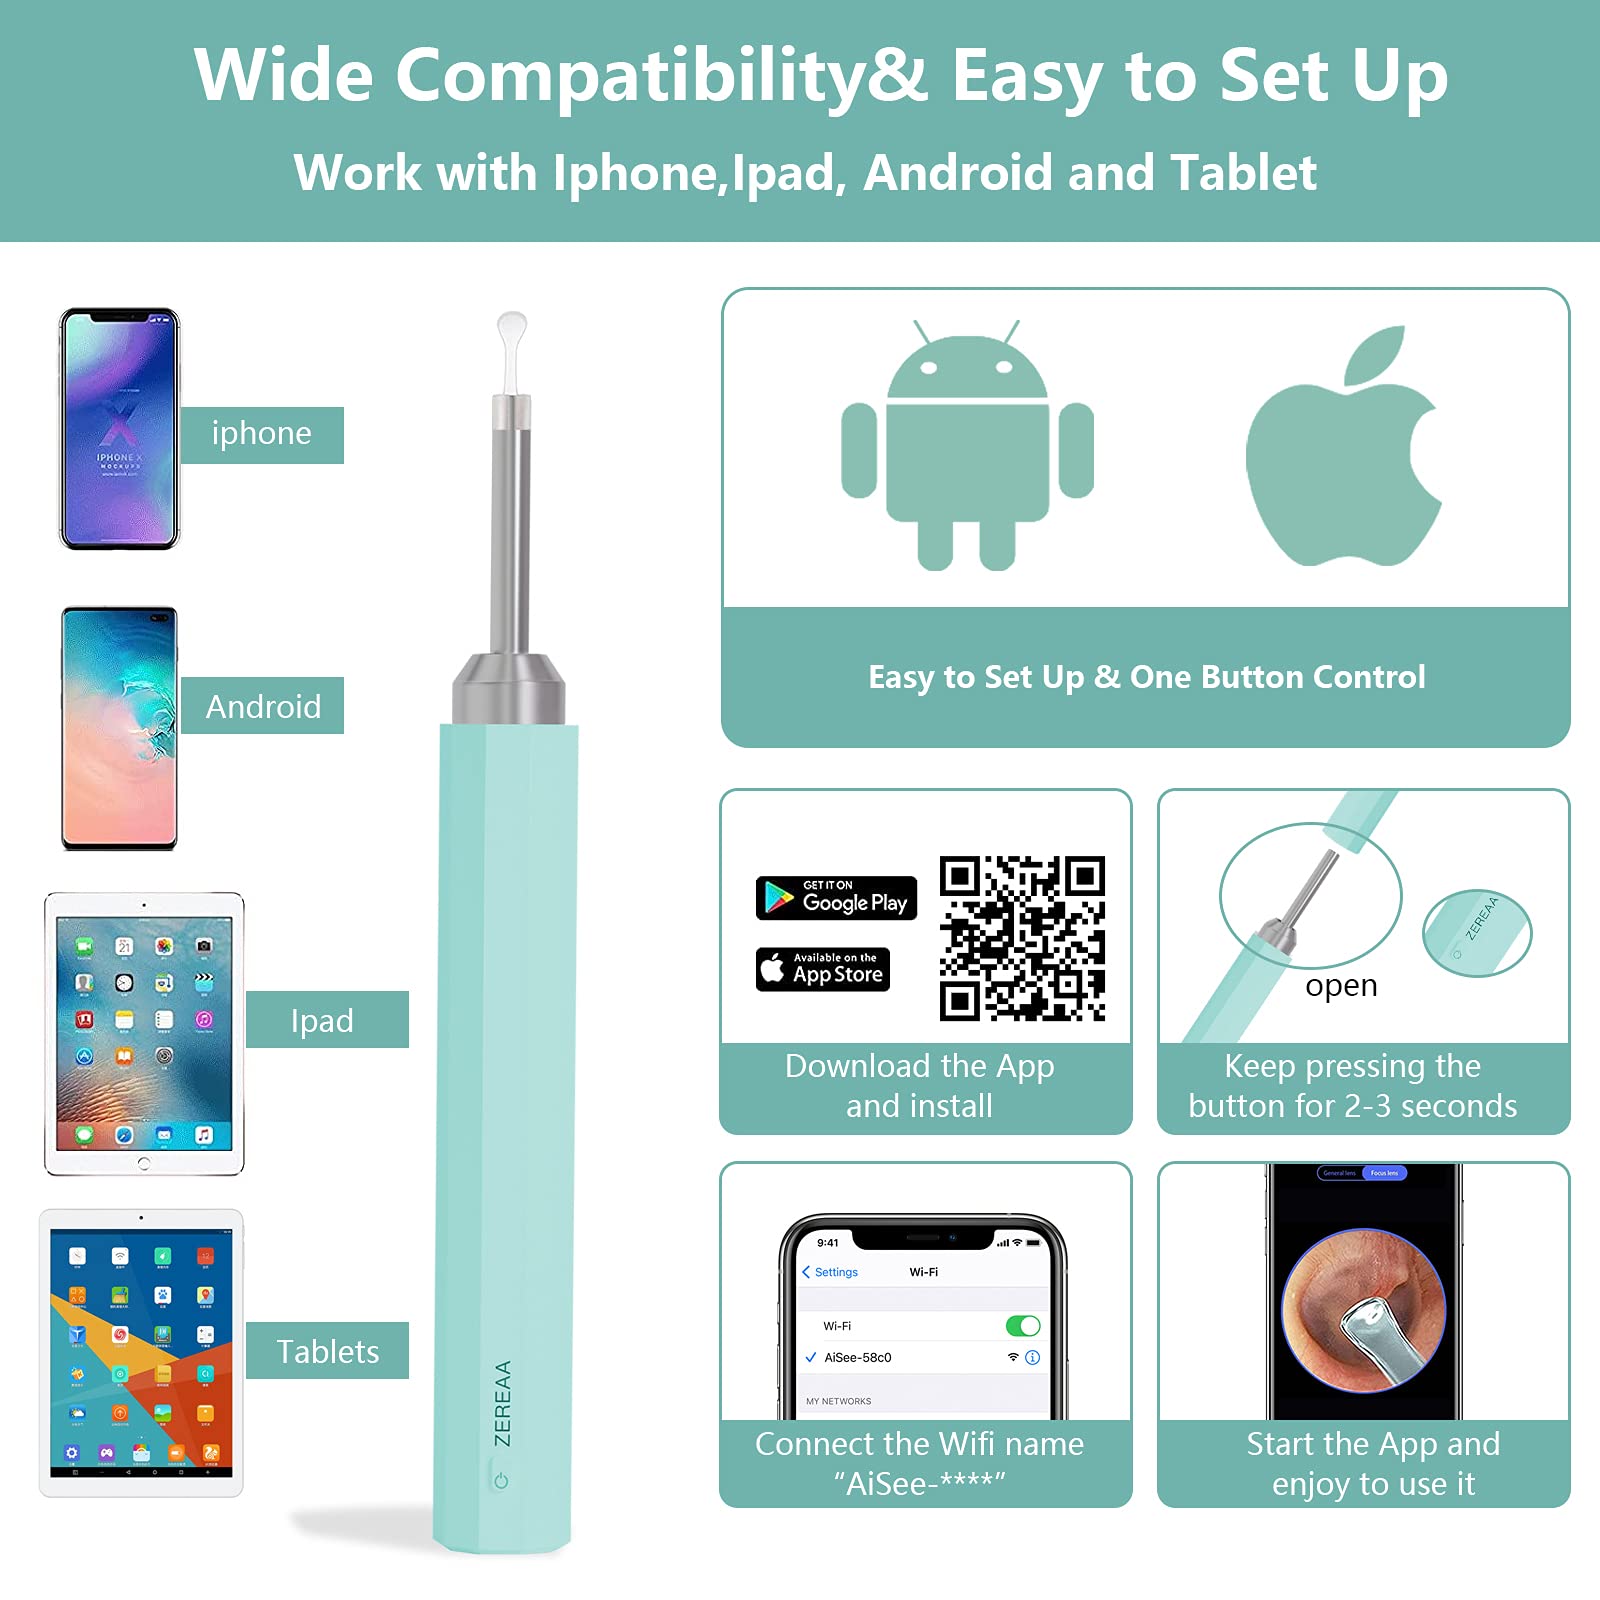 Ear Wax Removal, Ear Cleaner, Earwax Remover Tool with 1080P FHD, Wireless Endoscope Ear Camera Ear Pick Cleaning Kit, USB Charge Waterproof Otoscope for iPhone, iPad & Android Smart Phones